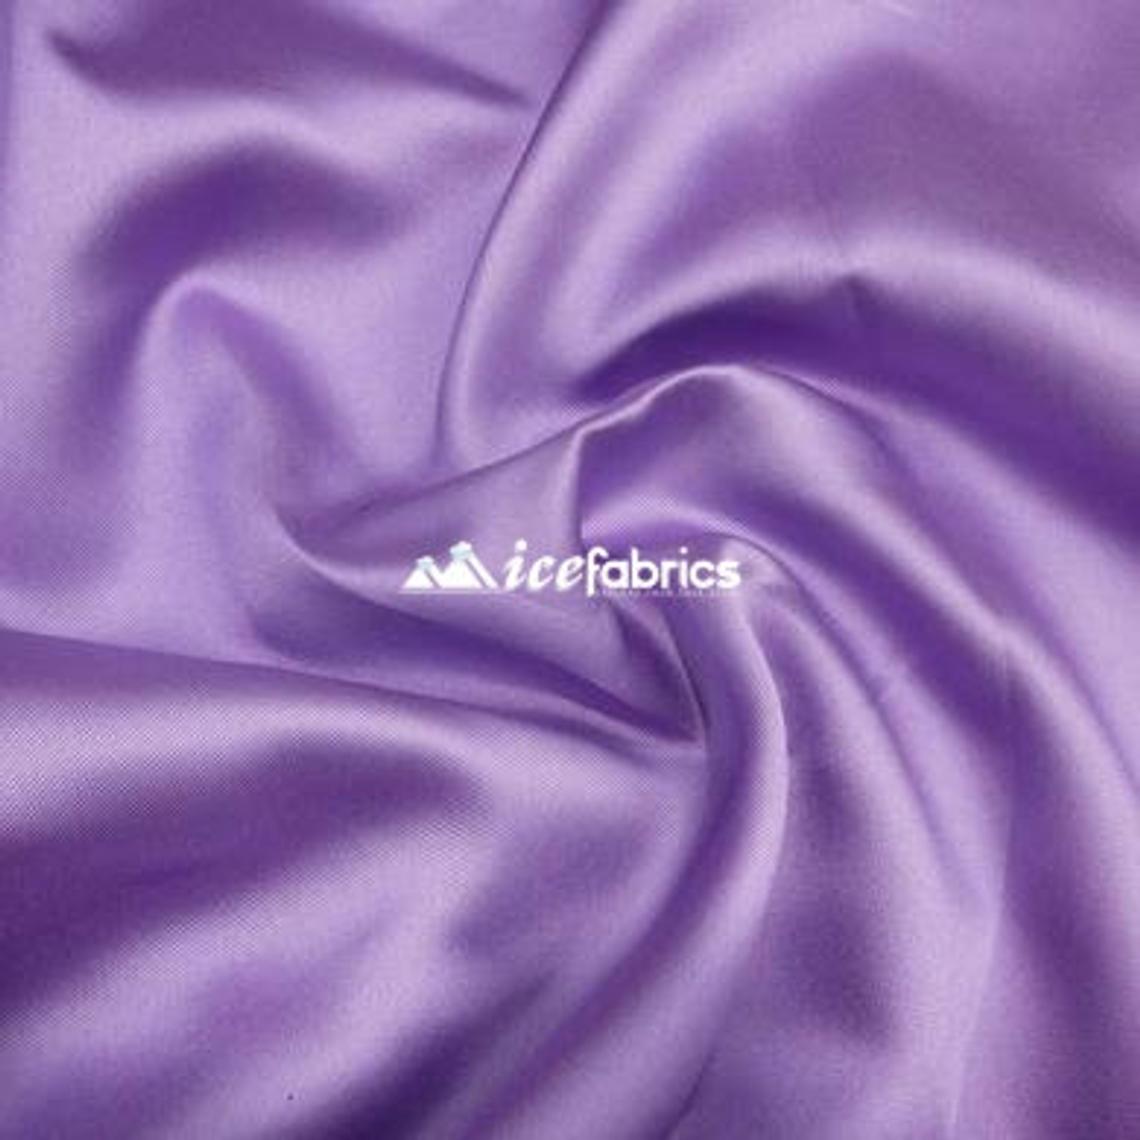 Silky Charmeuse Stretch Satin Fabric By The Roll(25 yards) Wholesale FabricSatin FabricICEFABRICICE FABRICSLavenderBy The Roll (60" Wide)Silky Charmeuse Stretch Satin Fabric By The Roll(25 yards) Wholesale Fabric ICEFABRIC